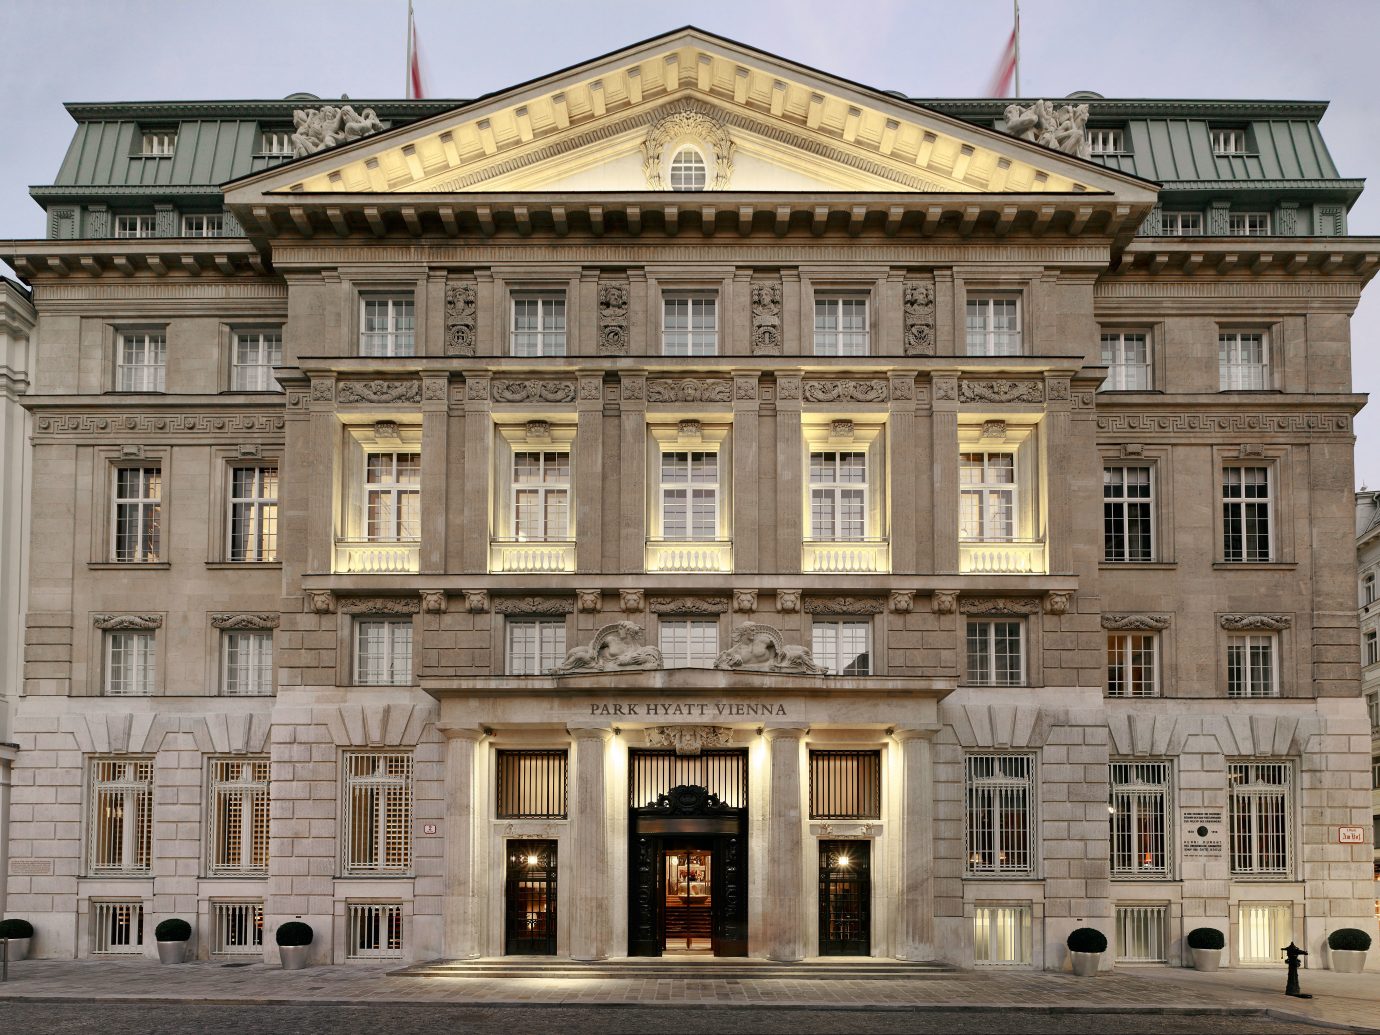 Architecture Austria Elegant europe Exterior Historic Hotels Romantic Vienna building outdoor sky government building classical architecture landmark palace facade opera house plaza estate ancient roman architecture big ancient history tourist attraction synagogue tall